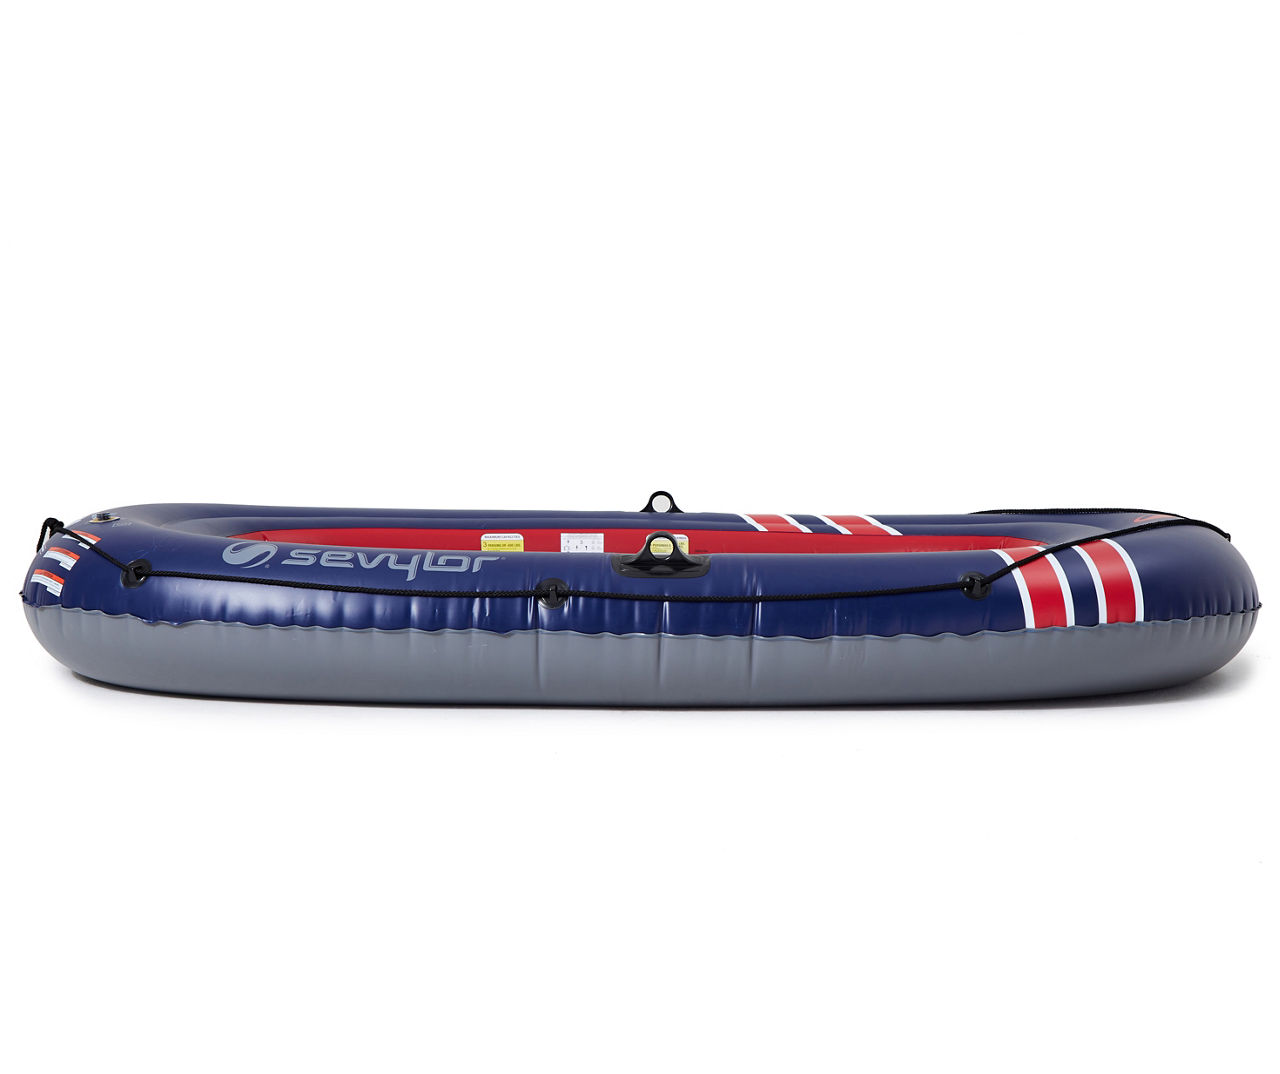 Sevylor　Inflatable　3-Person　Boat　Caravelle　Lots　300　Big